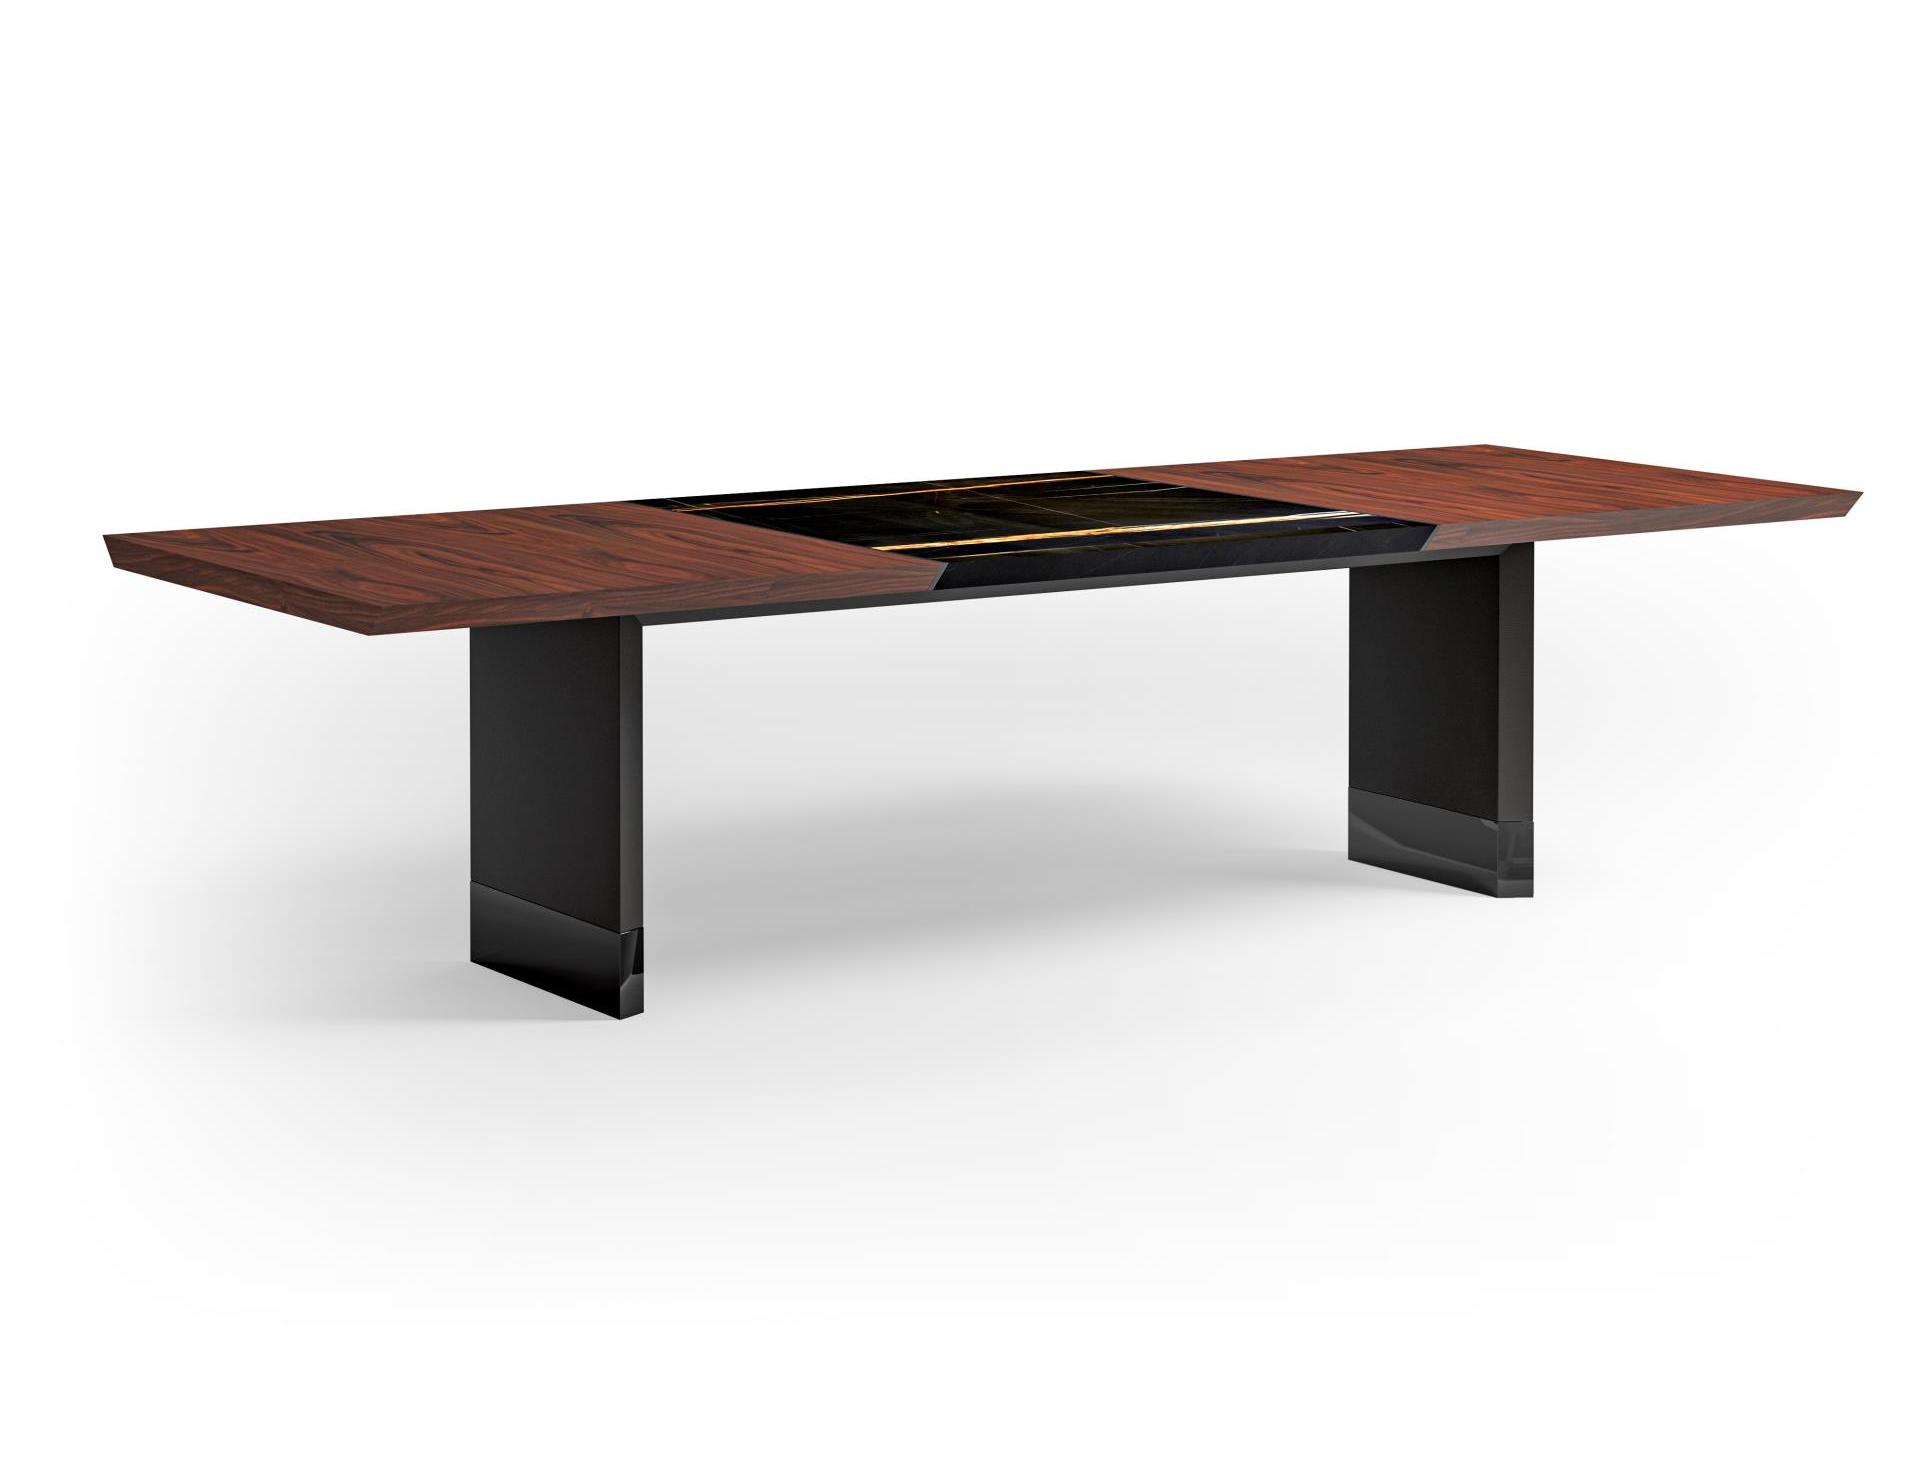 Luxurious Marble-Enhanced Table 300 with Leather Details